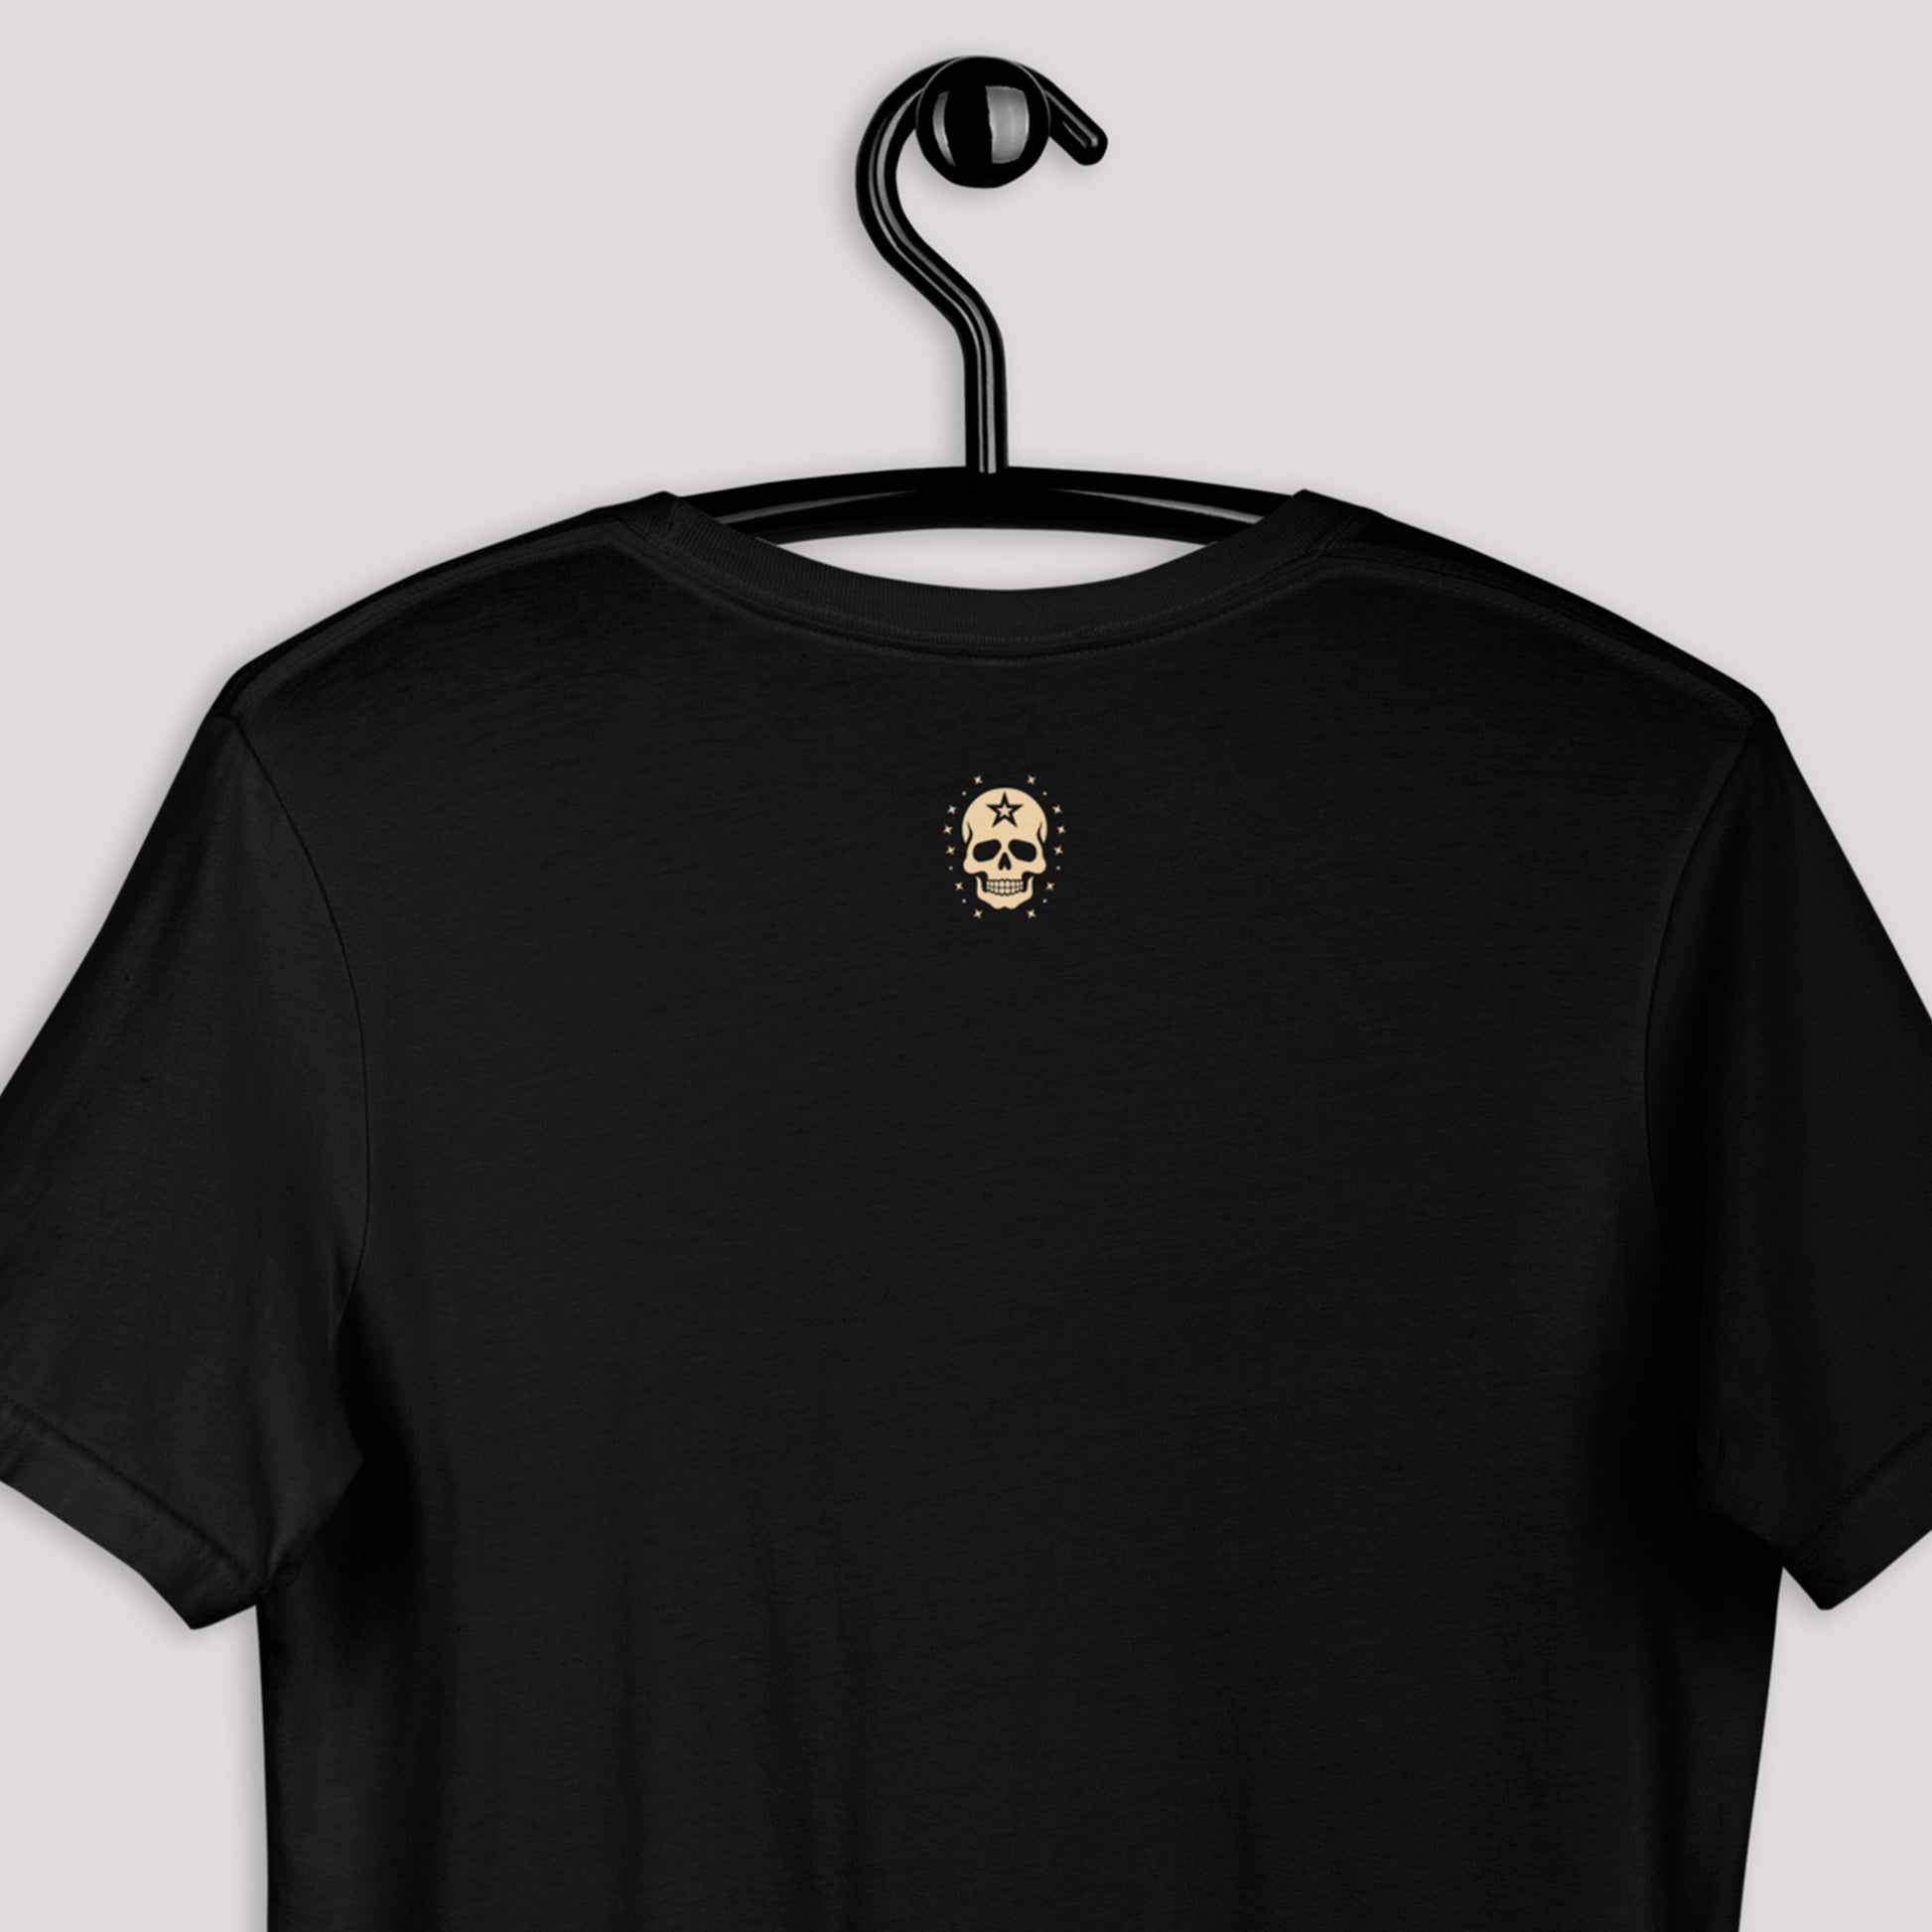 closeup of back view of black Anchor's Tale Unisex t-shirt displayed on a hanger